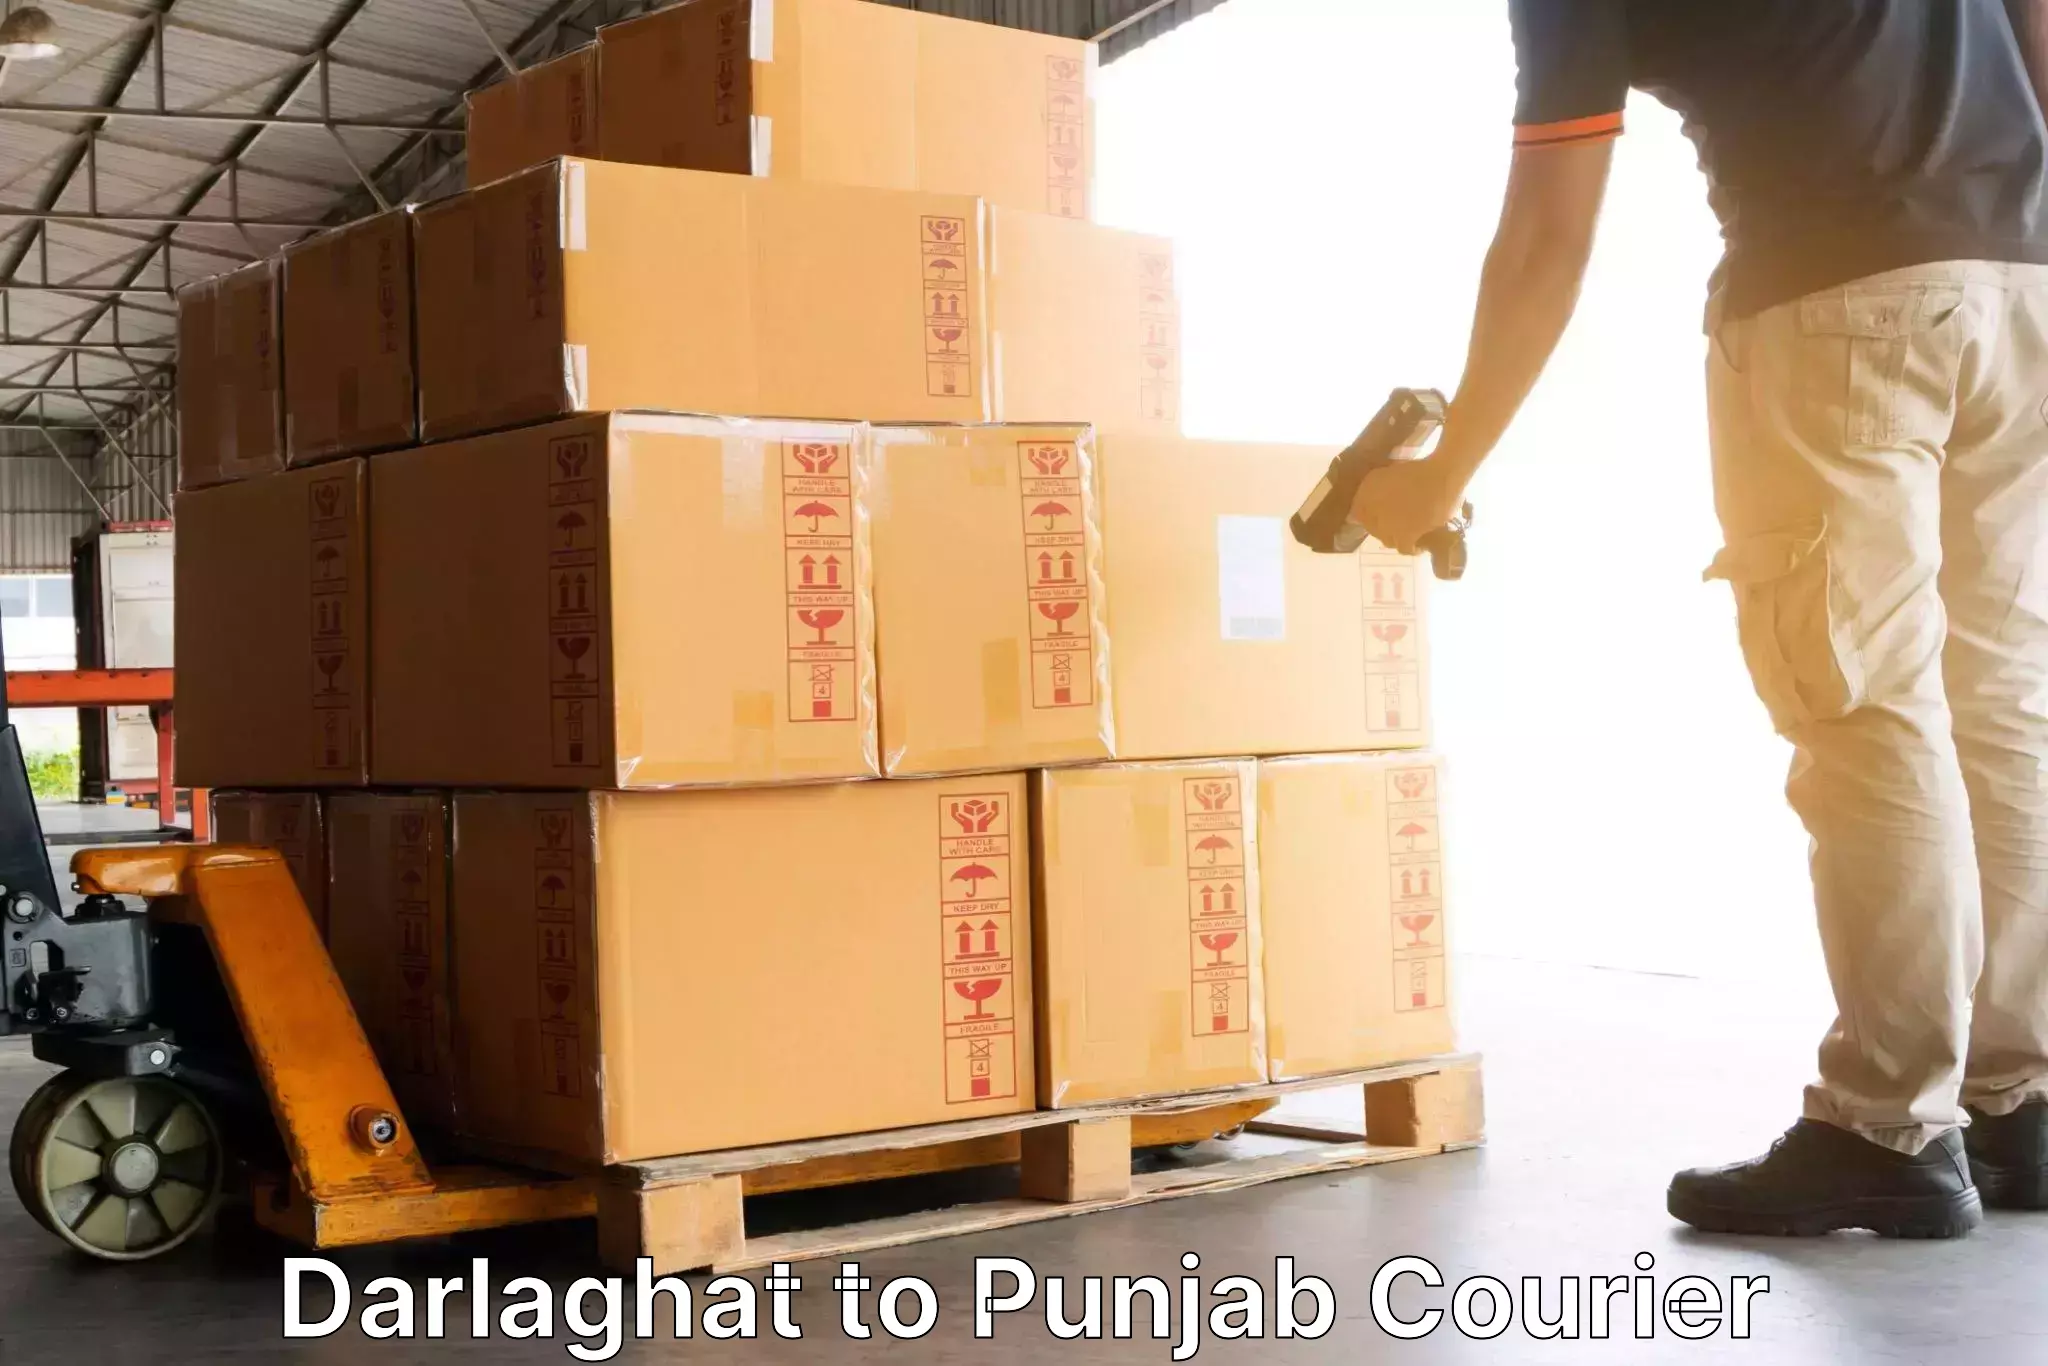 Secure packaging in Darlaghat to Amritsar